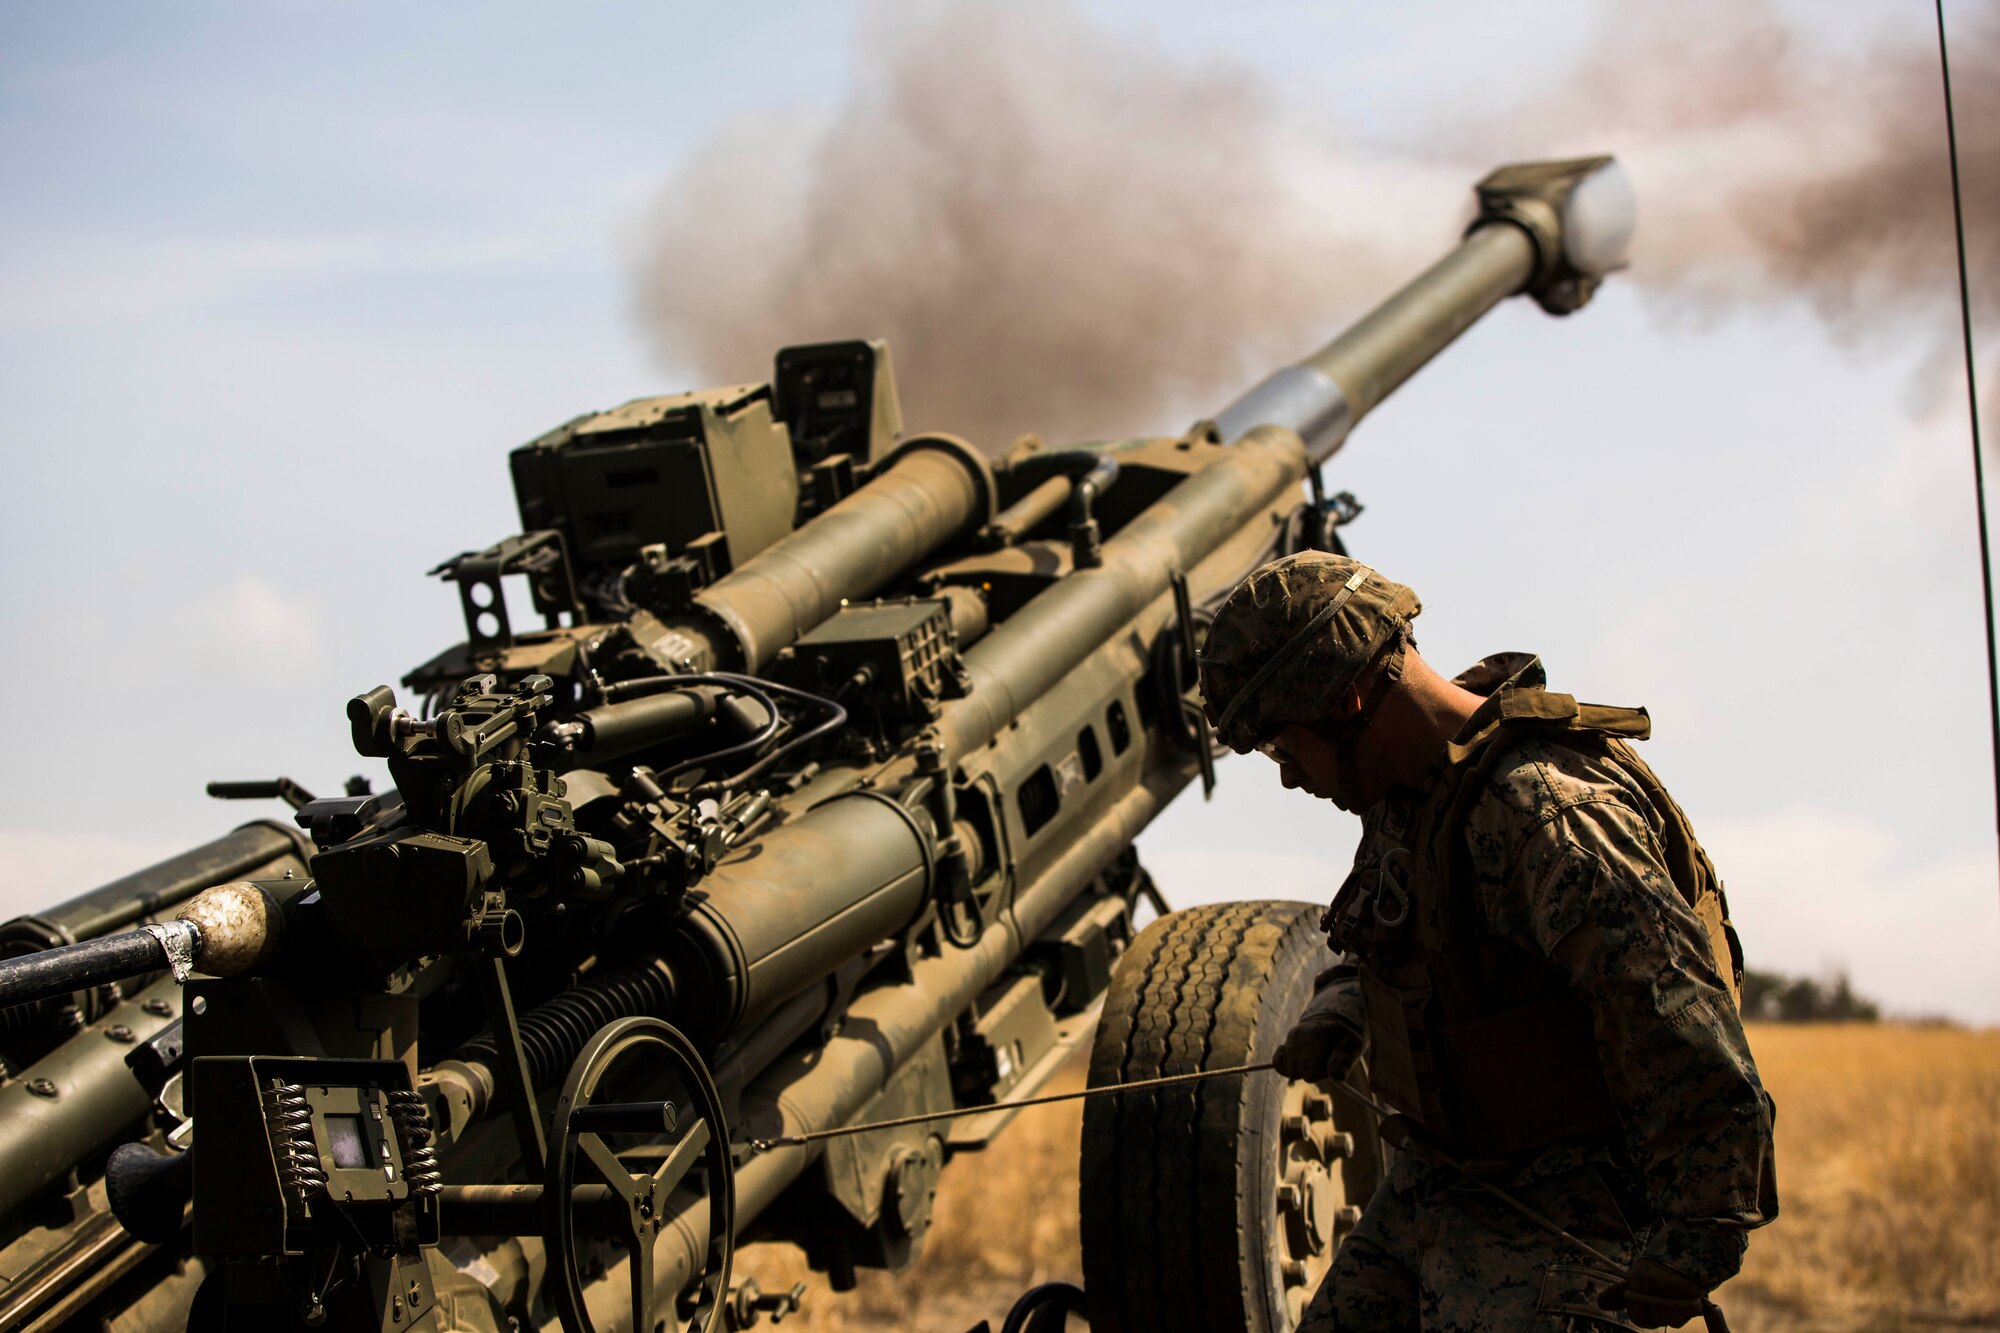 A Marine stands next to a large military gun that has smoke coming out from the top.